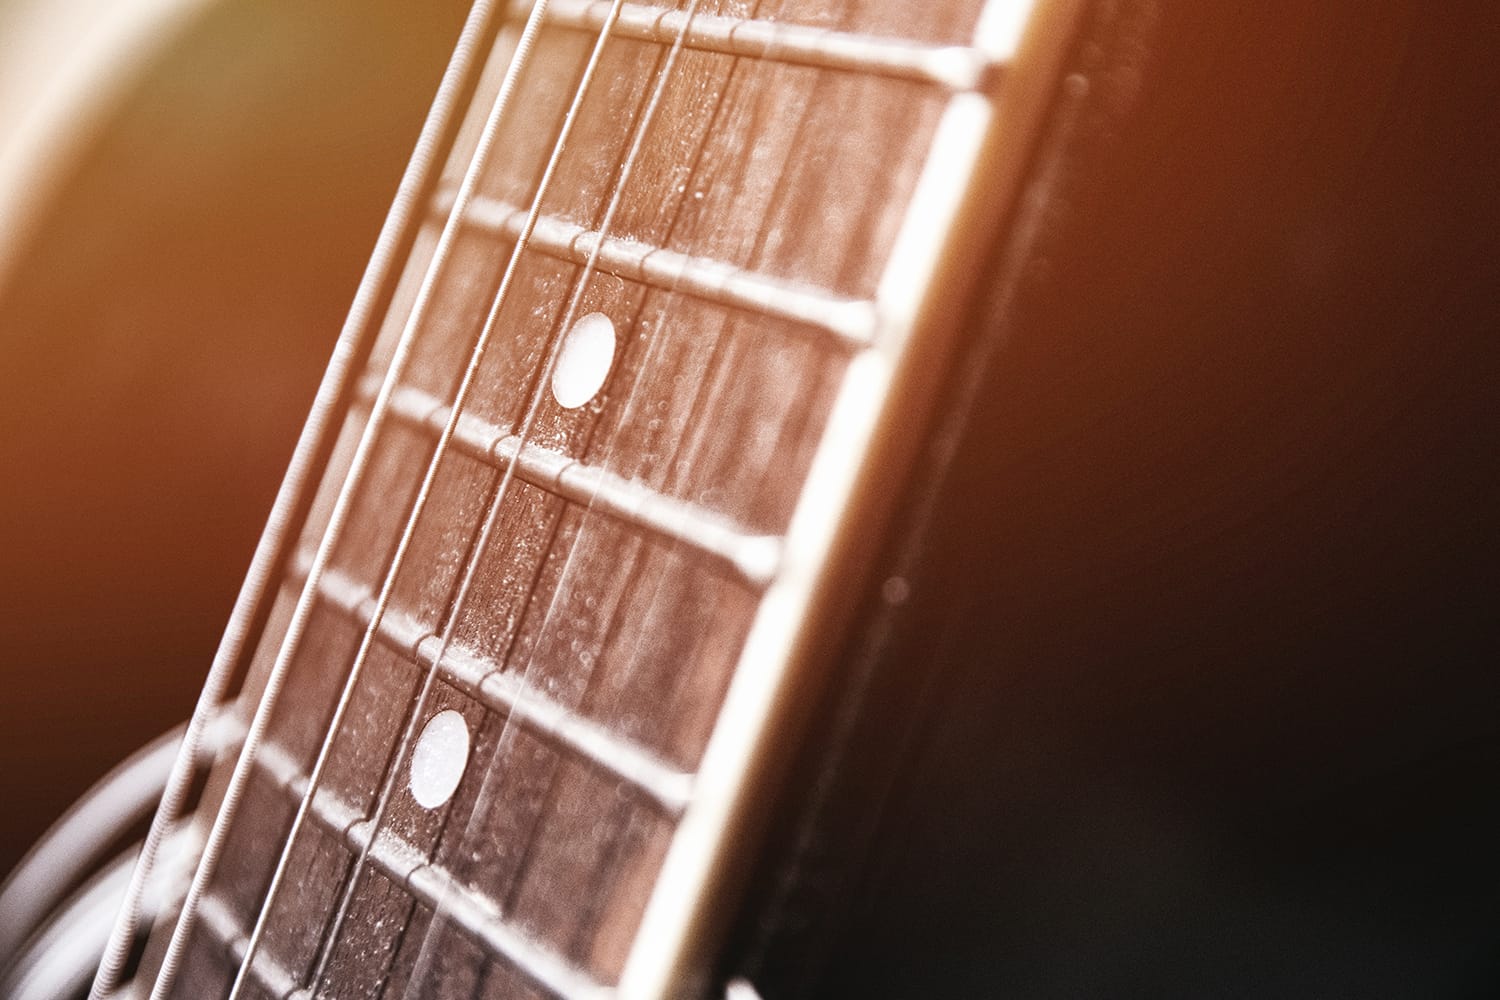 A close-up of guitar strings against a fretboard